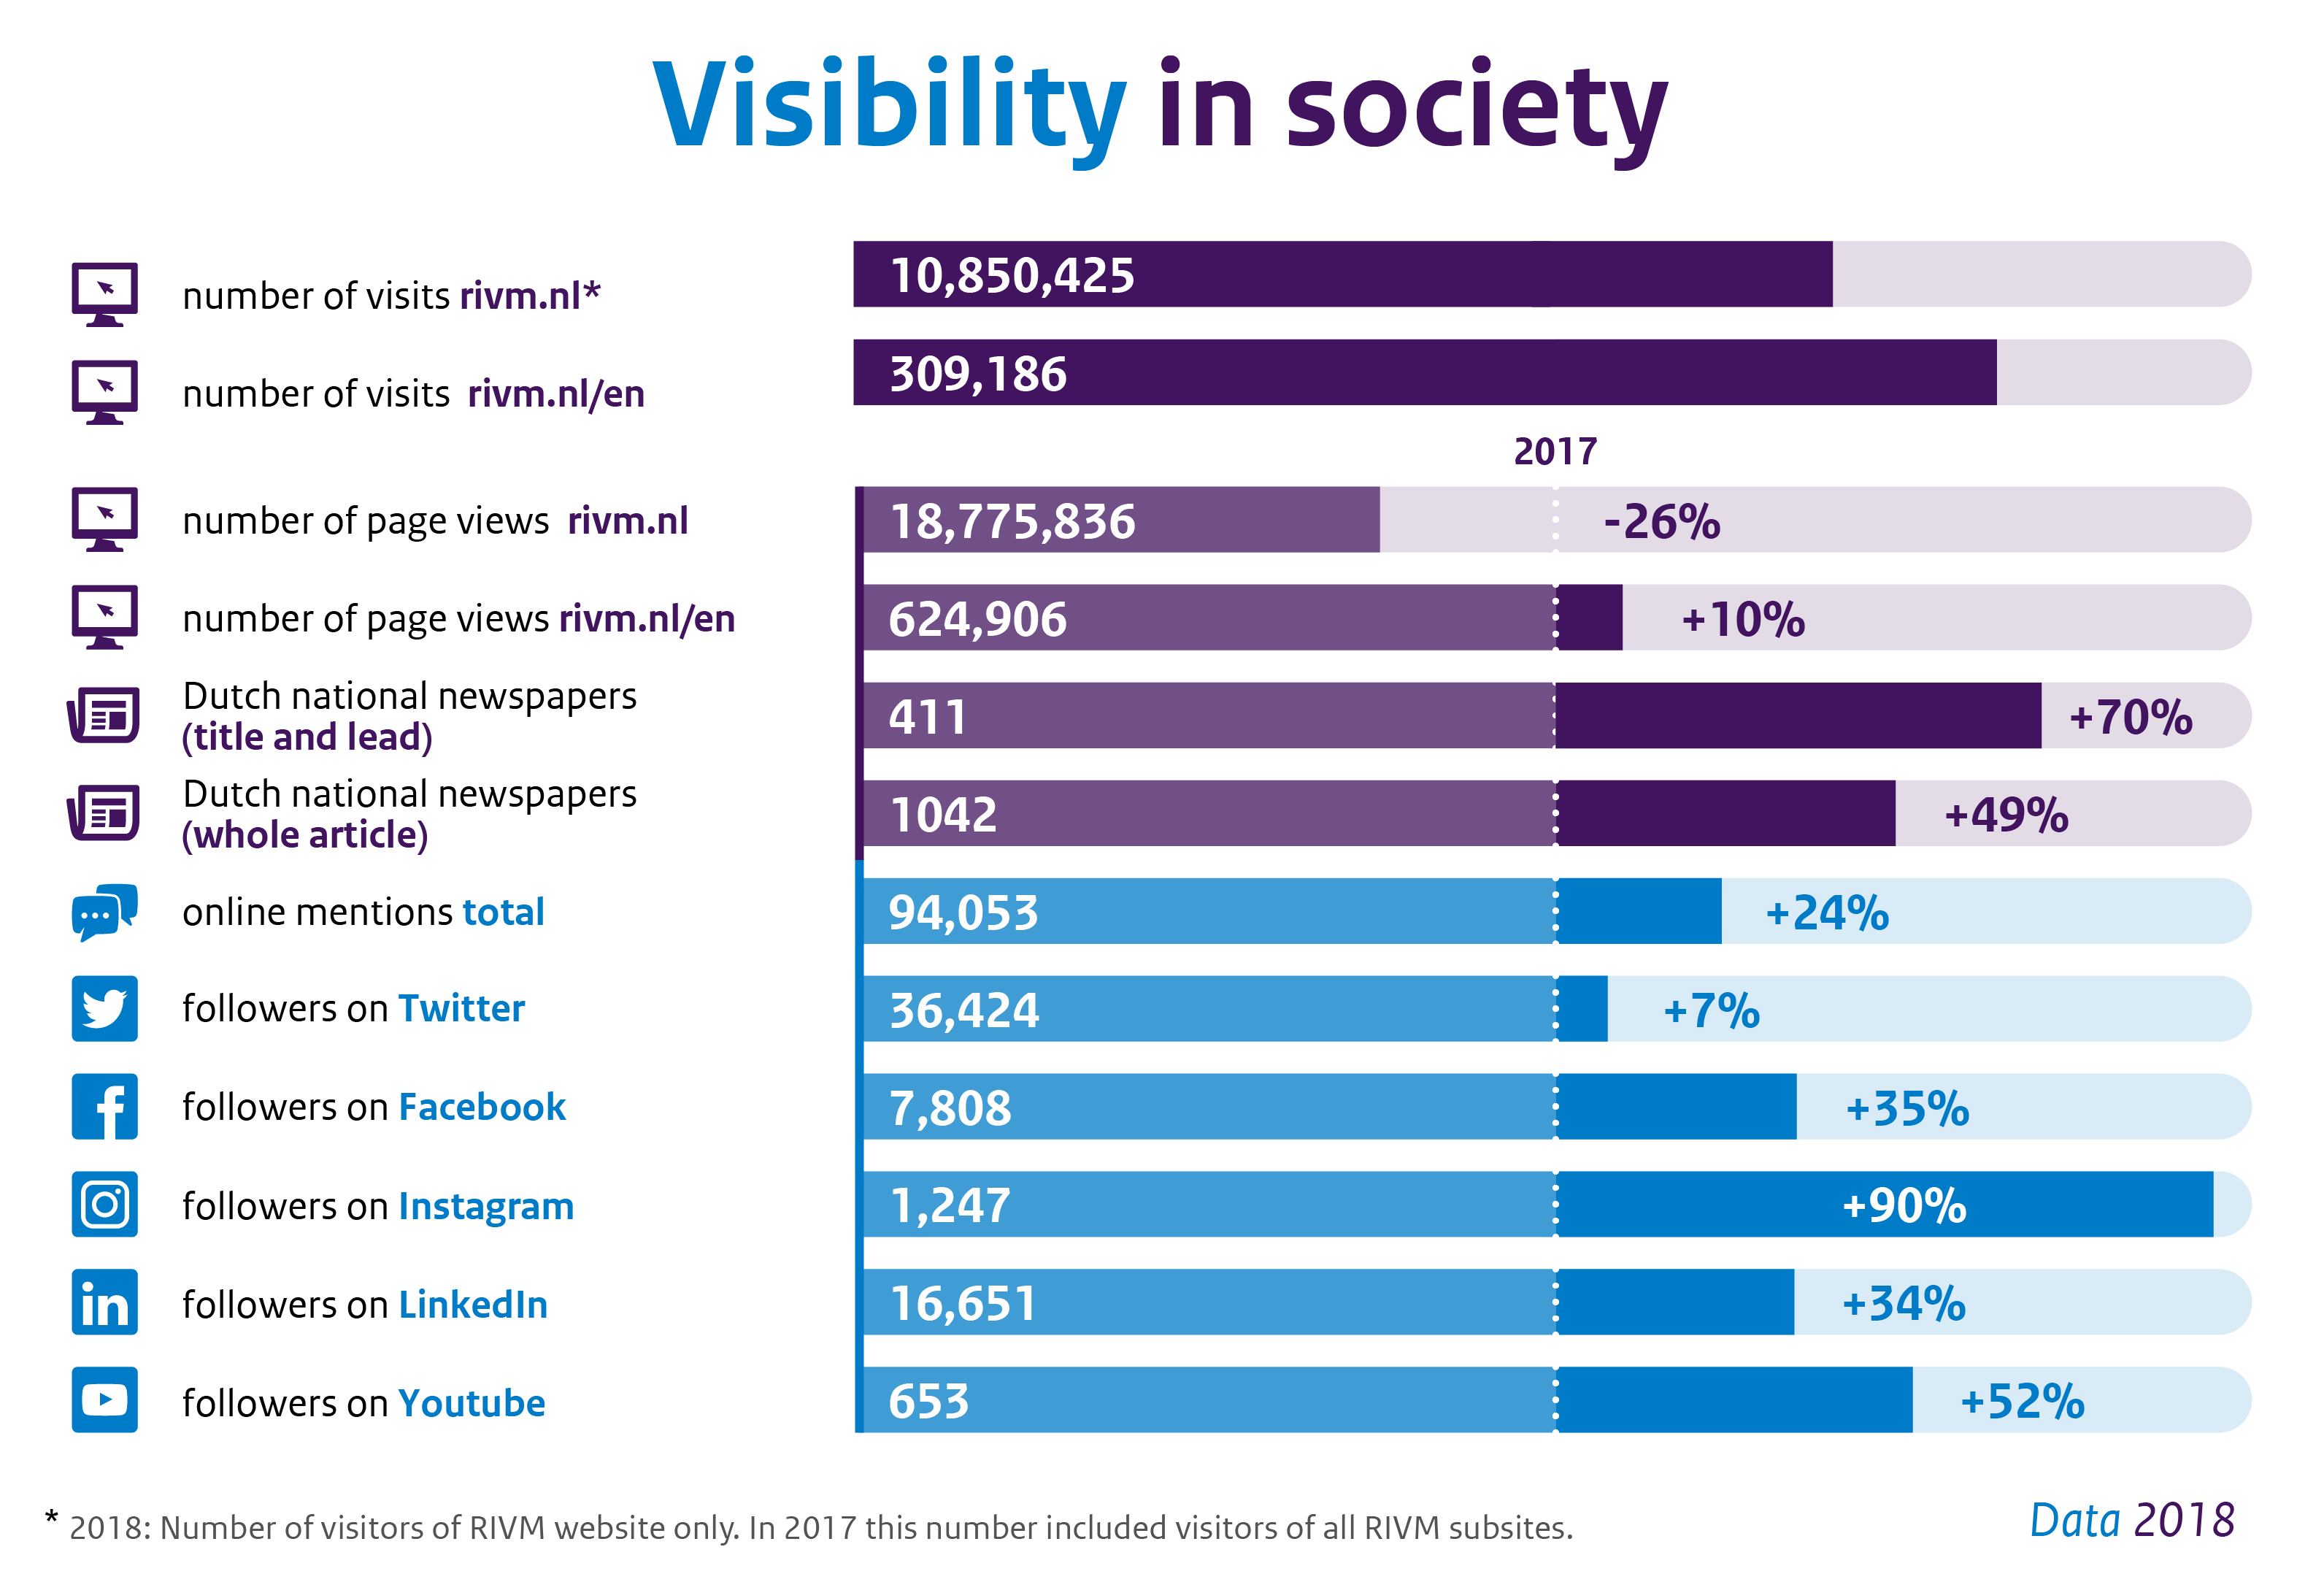 Infographic Visibility in society 2018